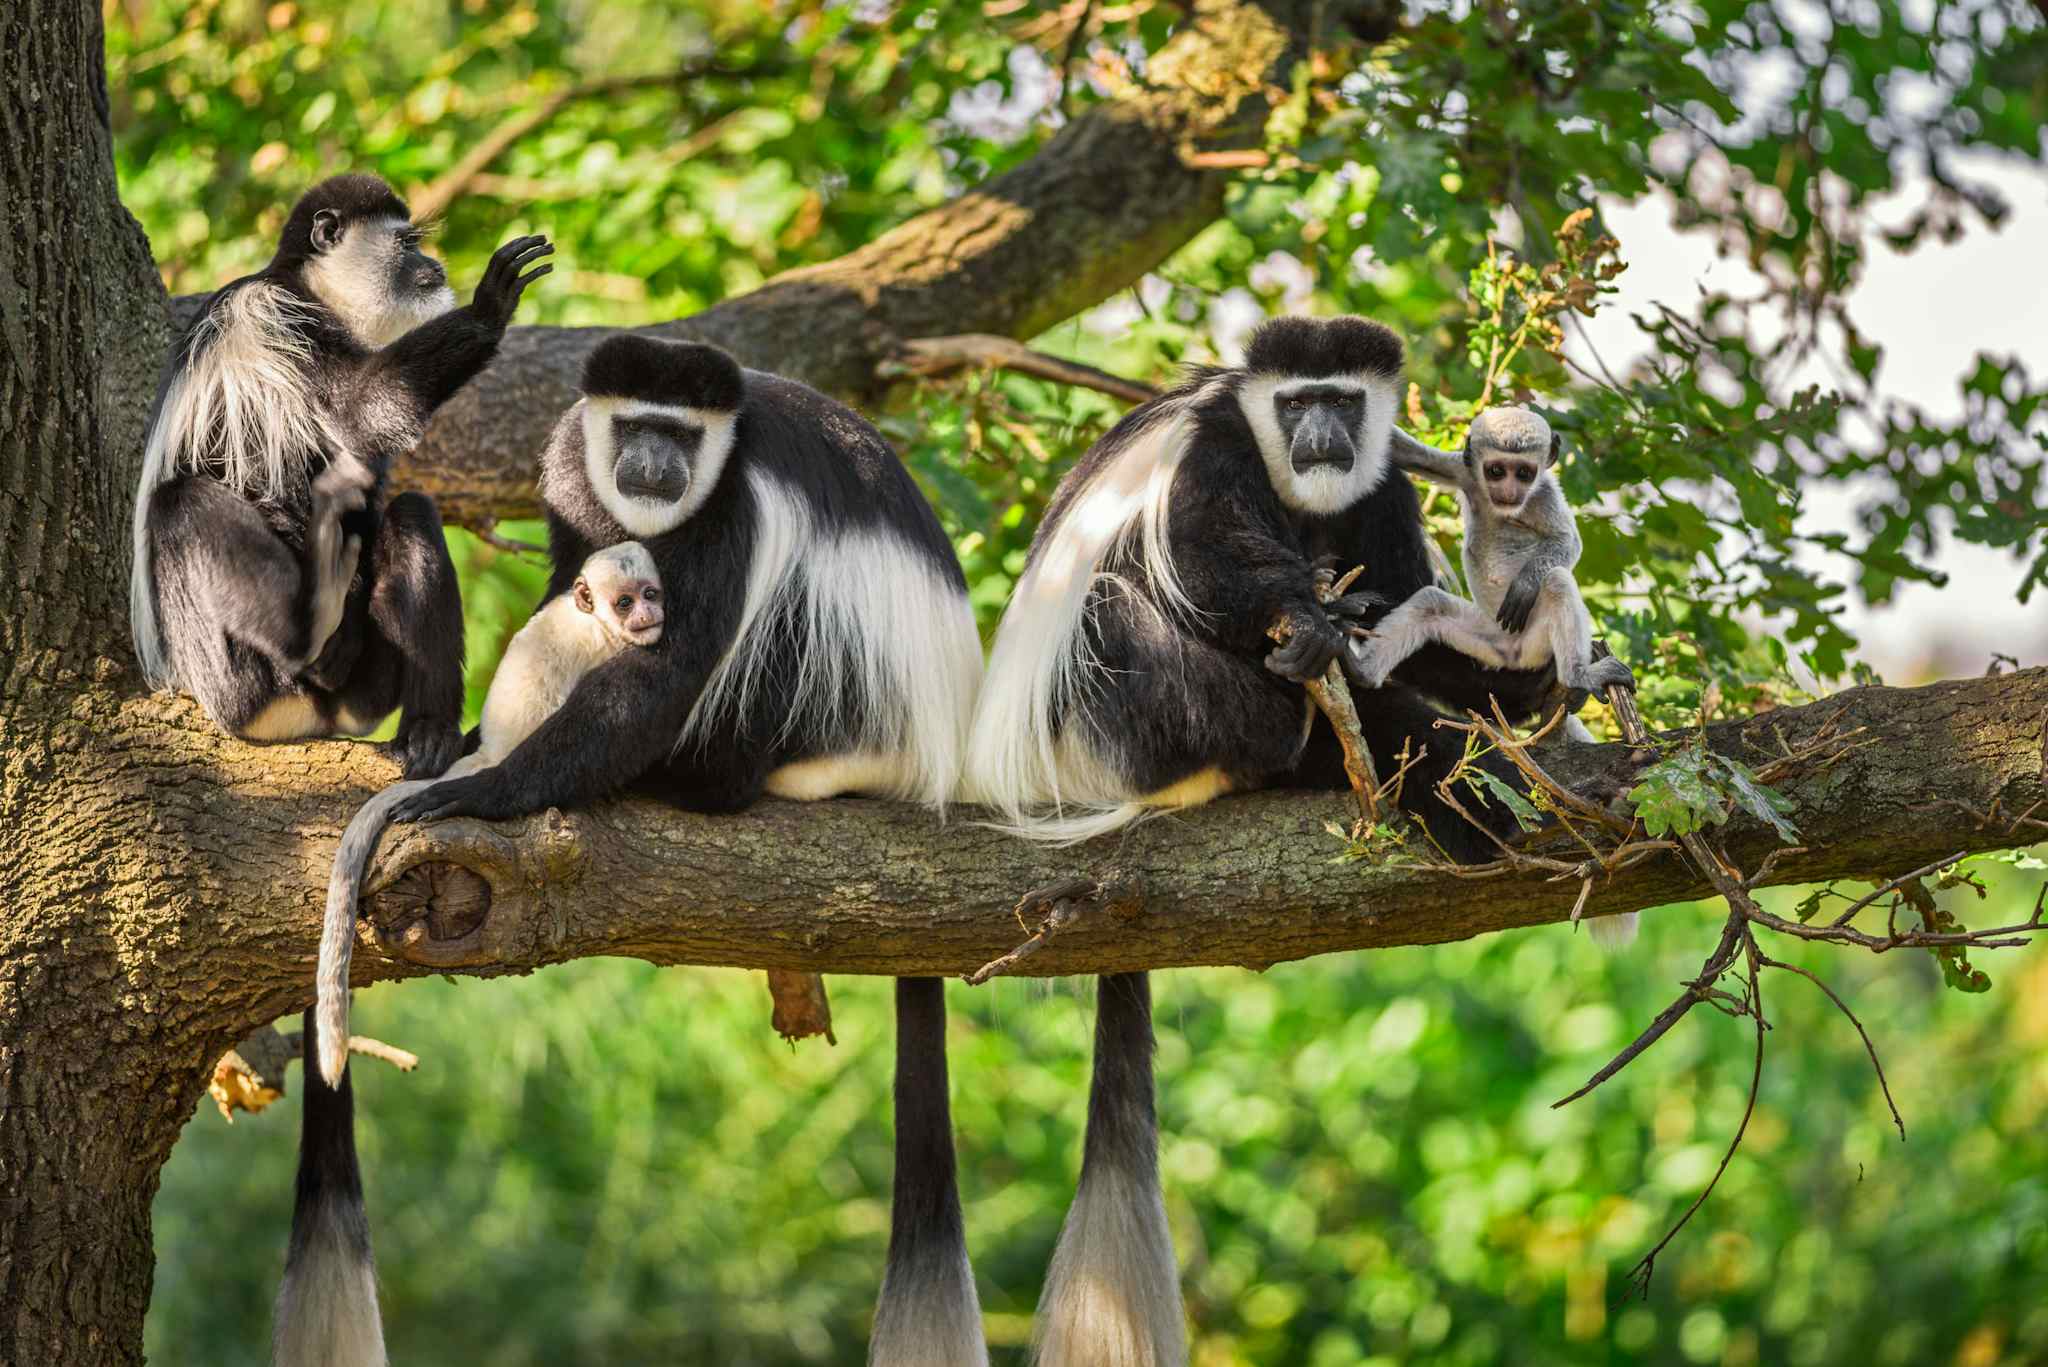 A family of black and white Colobus monkeys sitting on the branch of a tree in the forest.